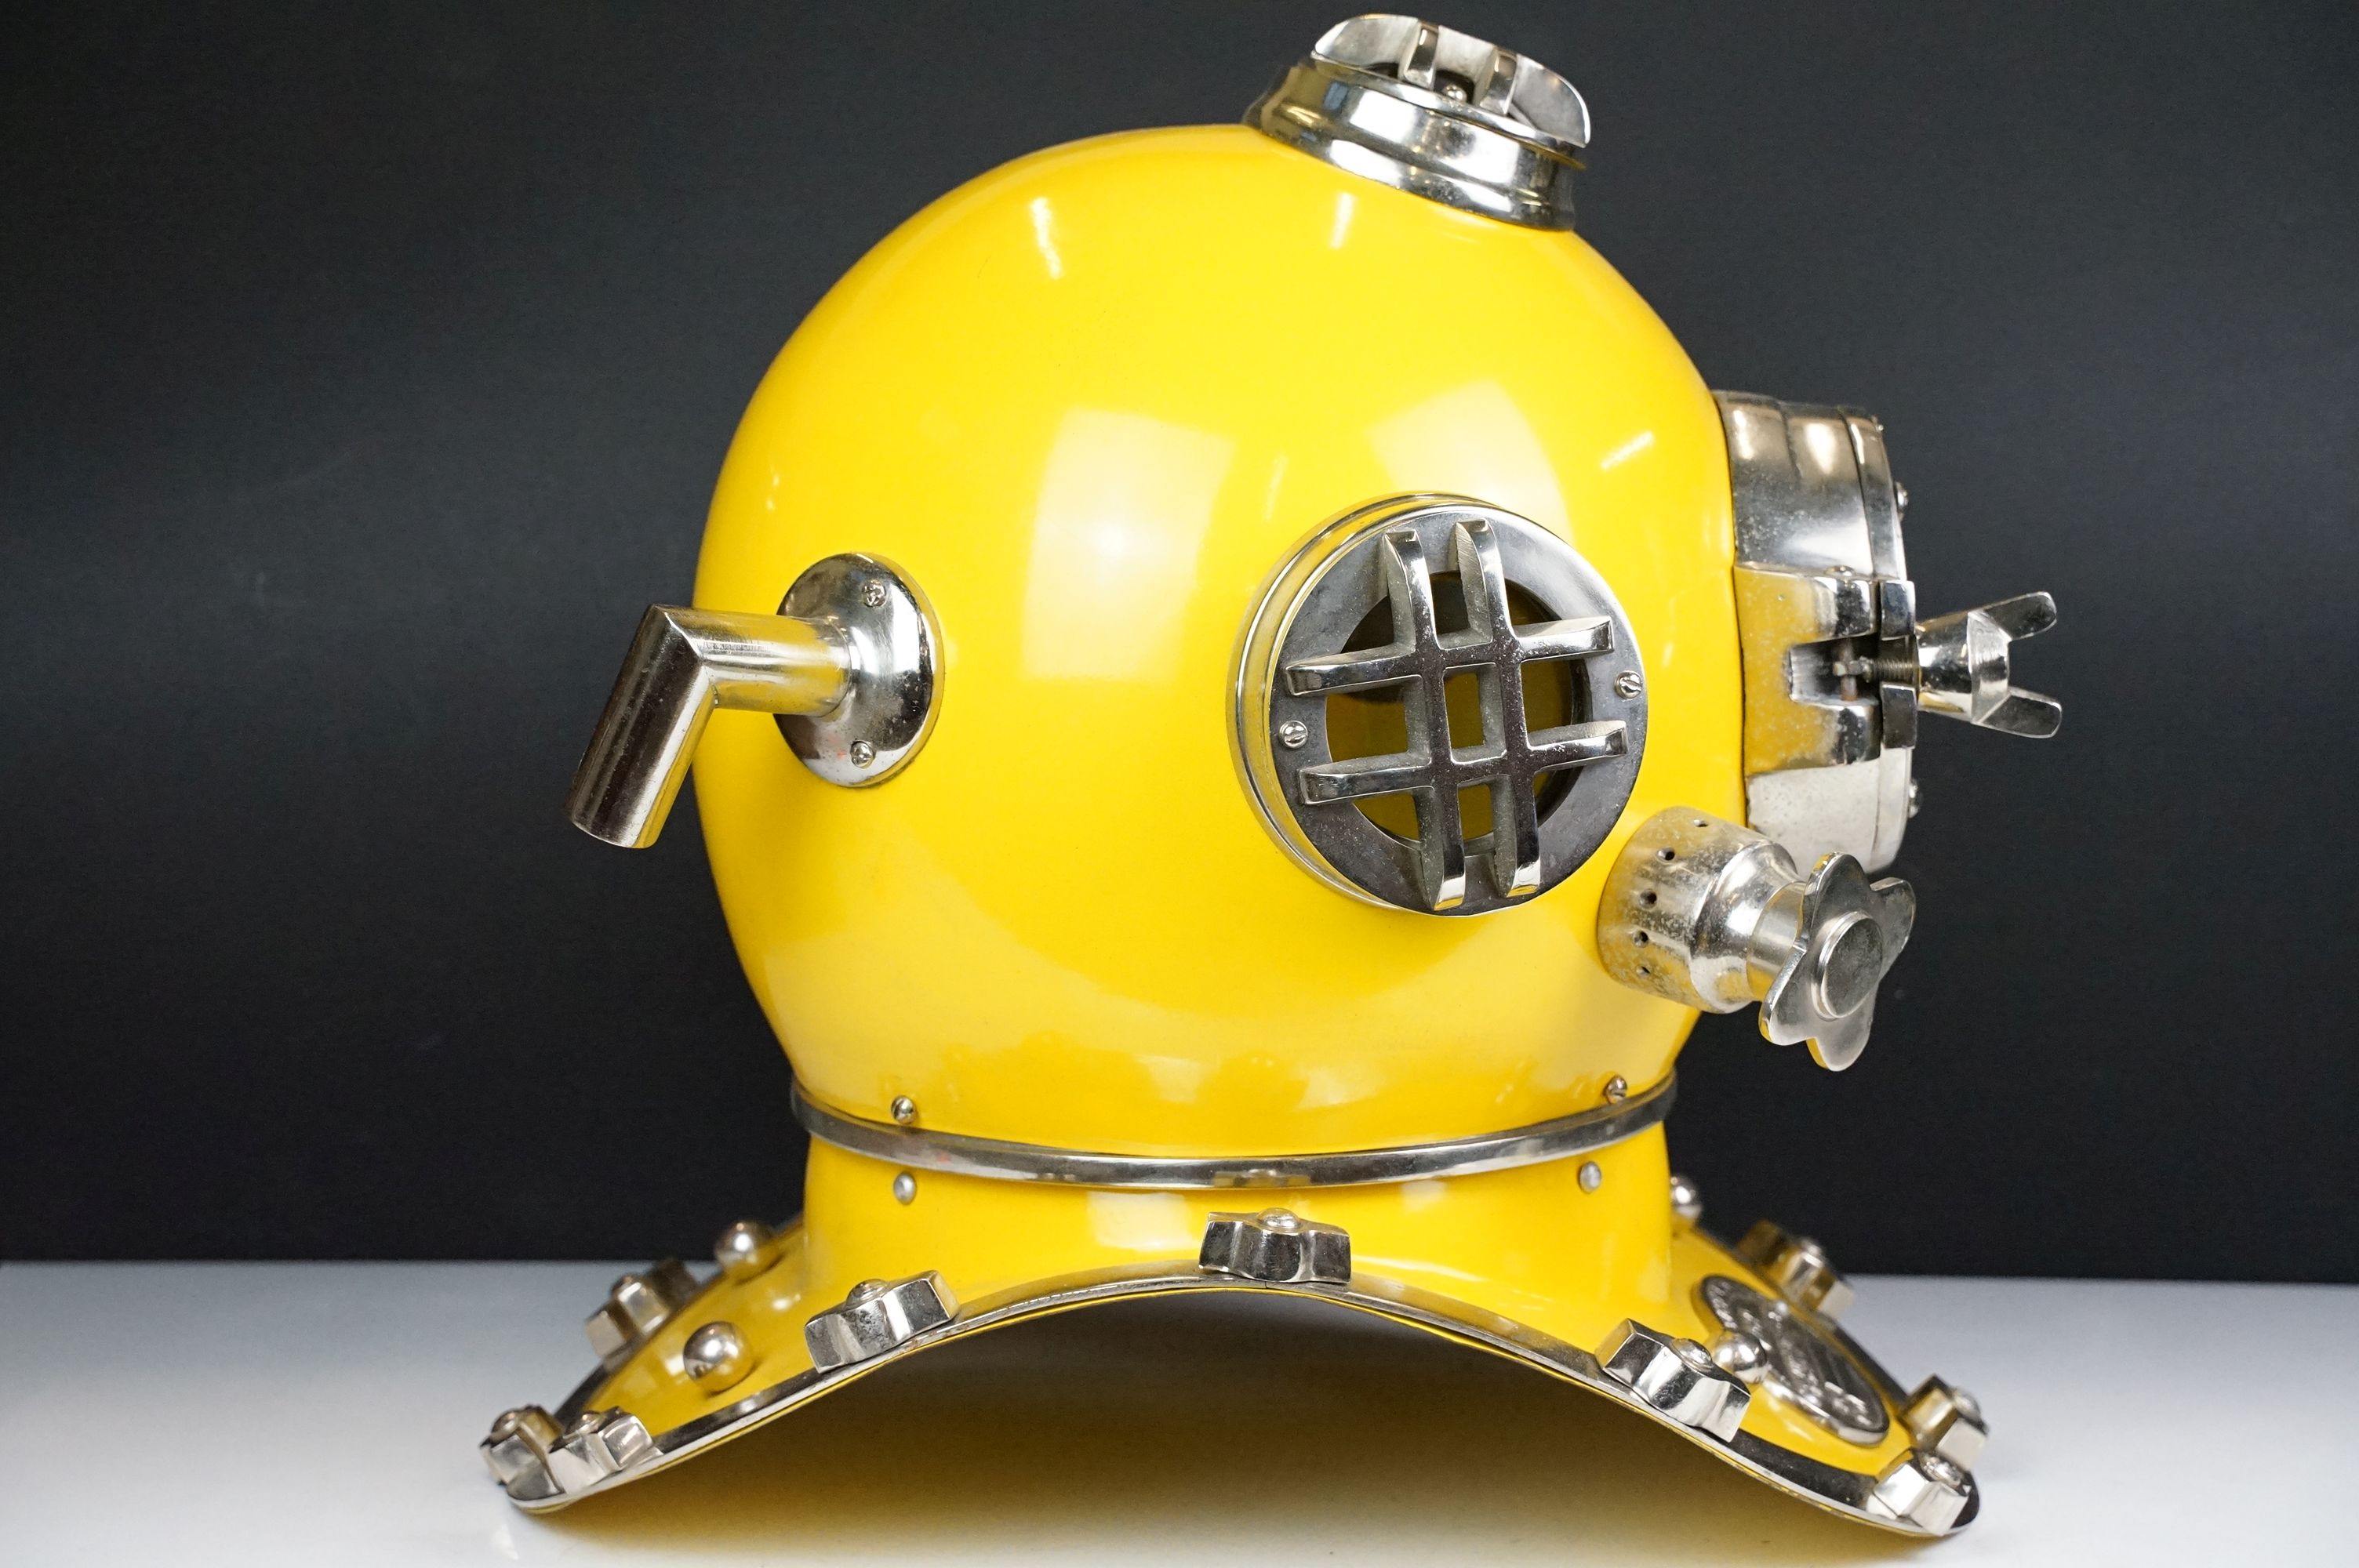 Reproduction US Navy Diving Helmet, for decorative purposes, bright yellow finish, plaque to front - Image 7 of 13